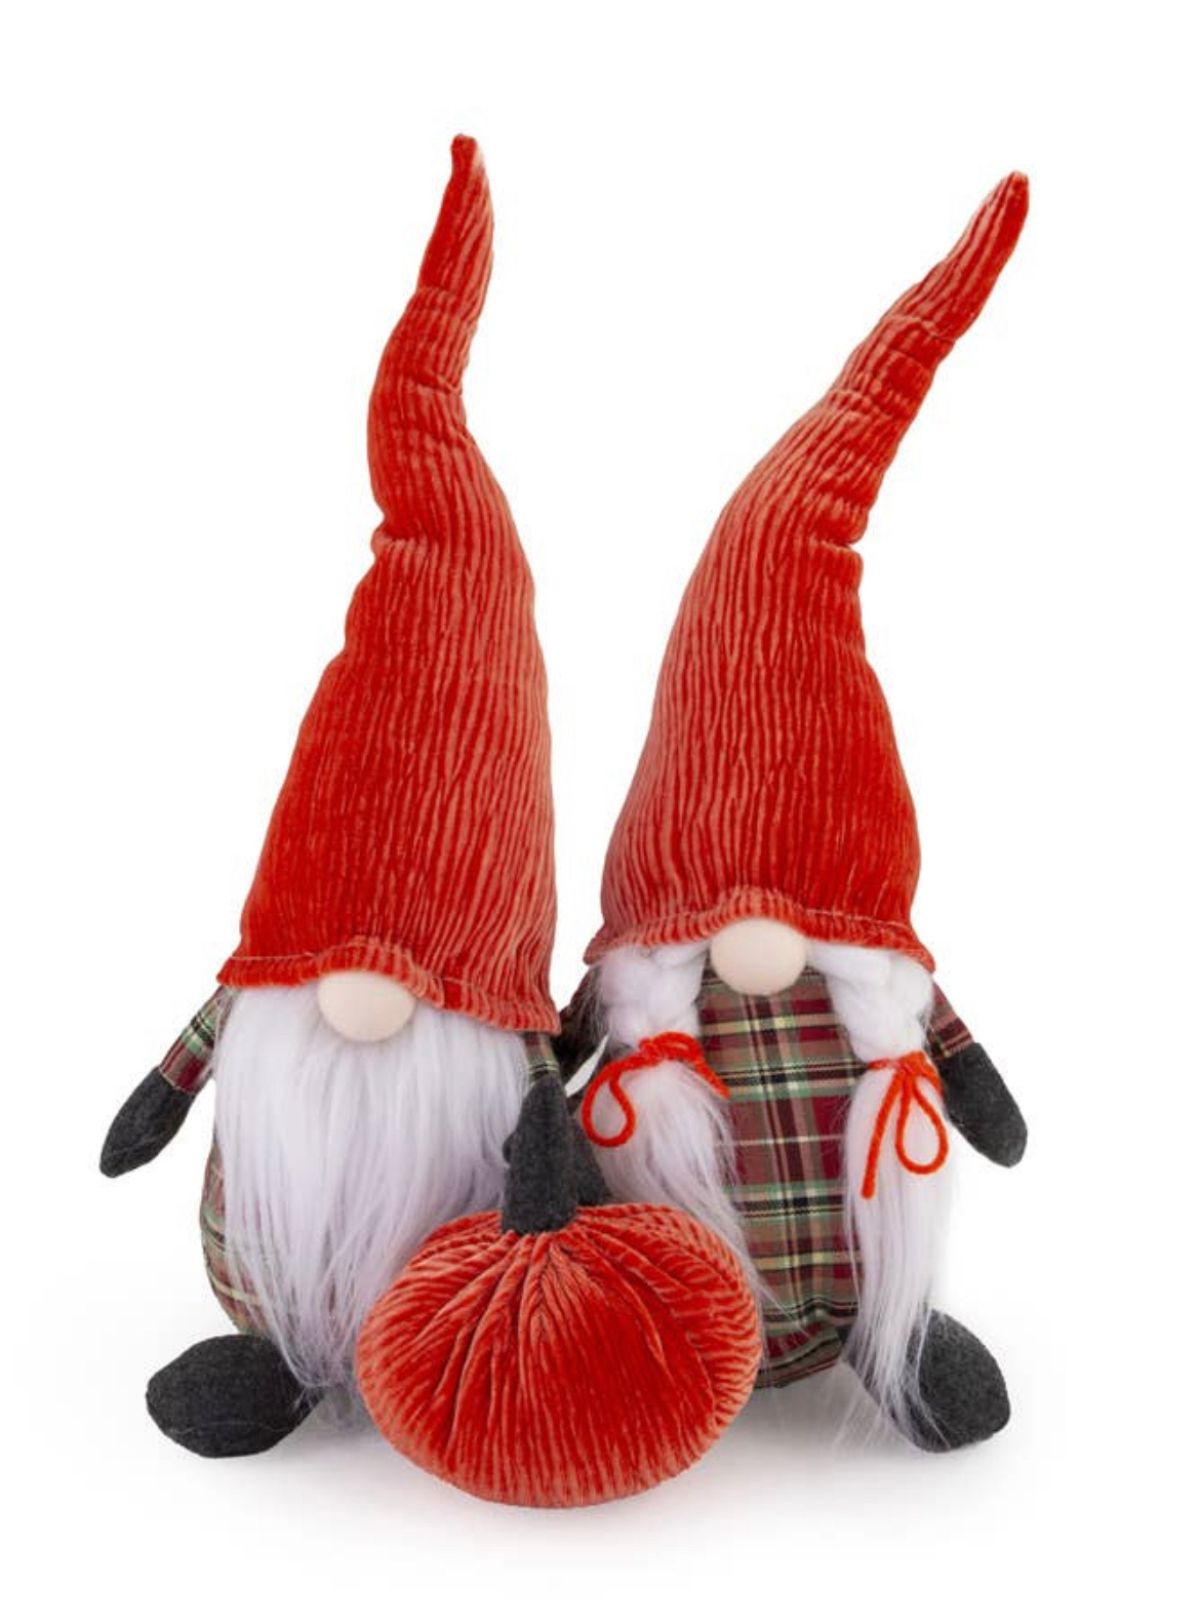 Add a charming touch to fall home decorating with this pair of fabric gnomes each with an orange corduroy hat.